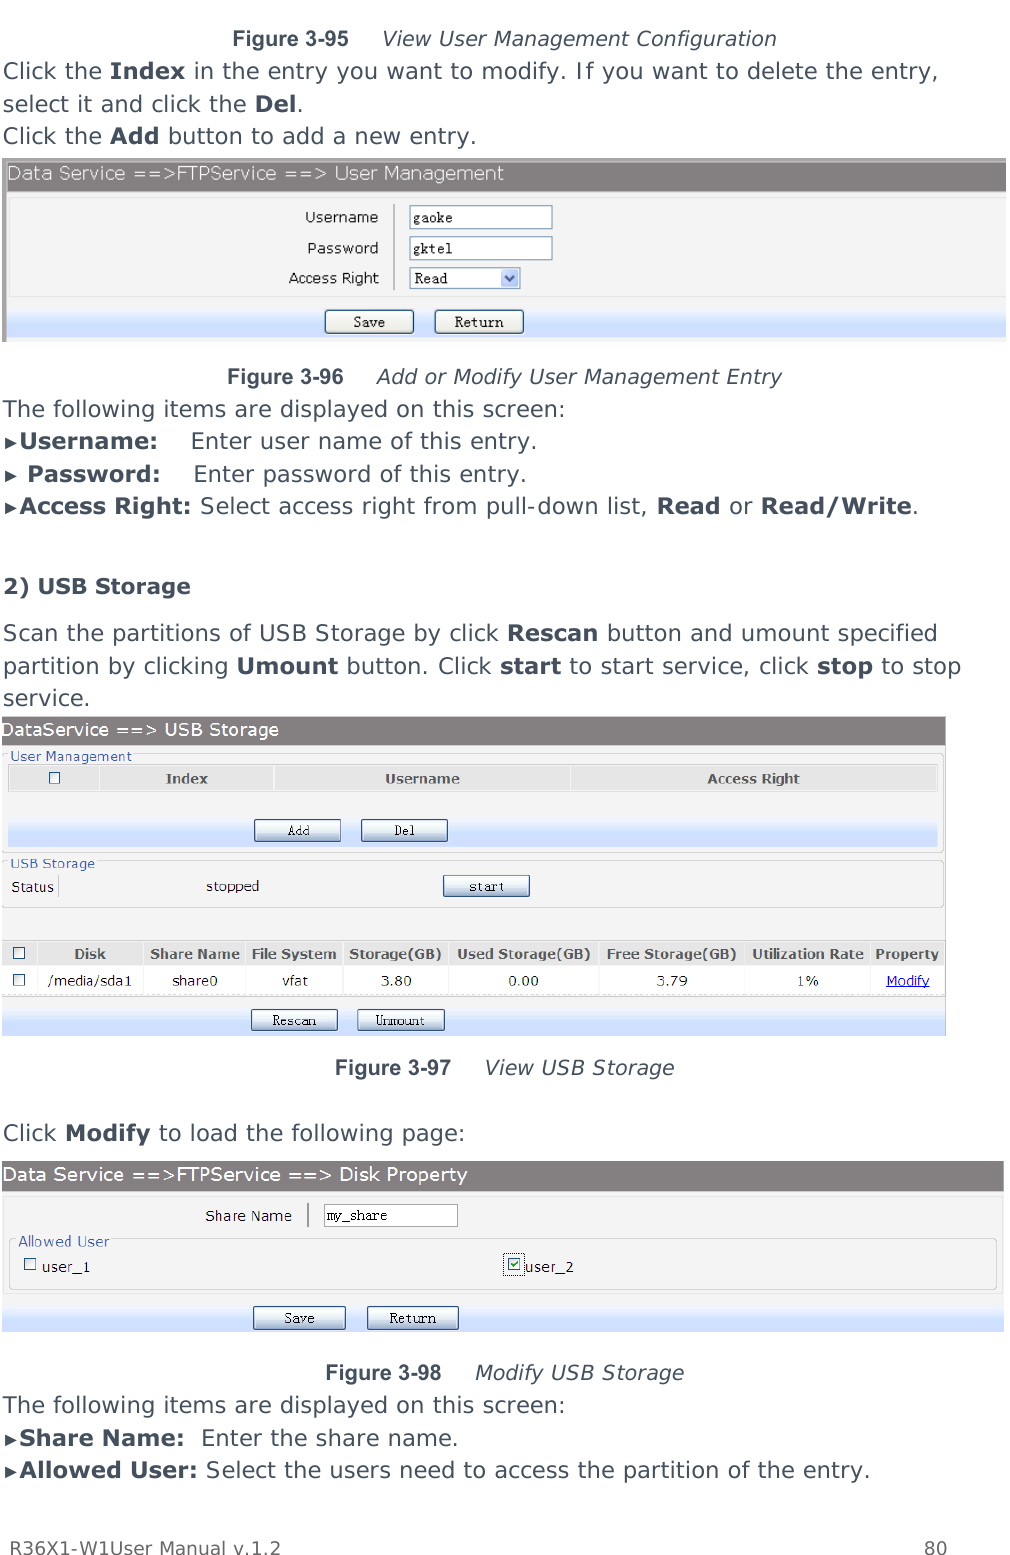           R36X1-W1User Manual v.1.2    80  Figure 3-95  View User Management Configuration Click the Index in the entry you want to modify. If you want to delete the entry, select it and click the Del. Click the Add button to add a new entry.  Figure 3-96  Add or Modify User Management Entry The following items are displayed on this screen: ►Username:    Enter user name of this entry. ► Password:    Enter password of this entry. ►Access Right: Select access right from pull-down list, Read or Read/Write.  2) USB Storage Scan the partitions of USB Storage by click Rescan button and umount specified partition by clicking Umount button. Click start to start service, click stop to stop service.  Figure 3-97  View USB Storage  Click Modify to load the following page:  Figure 3-98  Modify USB Storage The following items are displayed on this screen: ►Share Name:  Enter the share name. ►Allowed User: Select the users need to access the partition of the entry. 